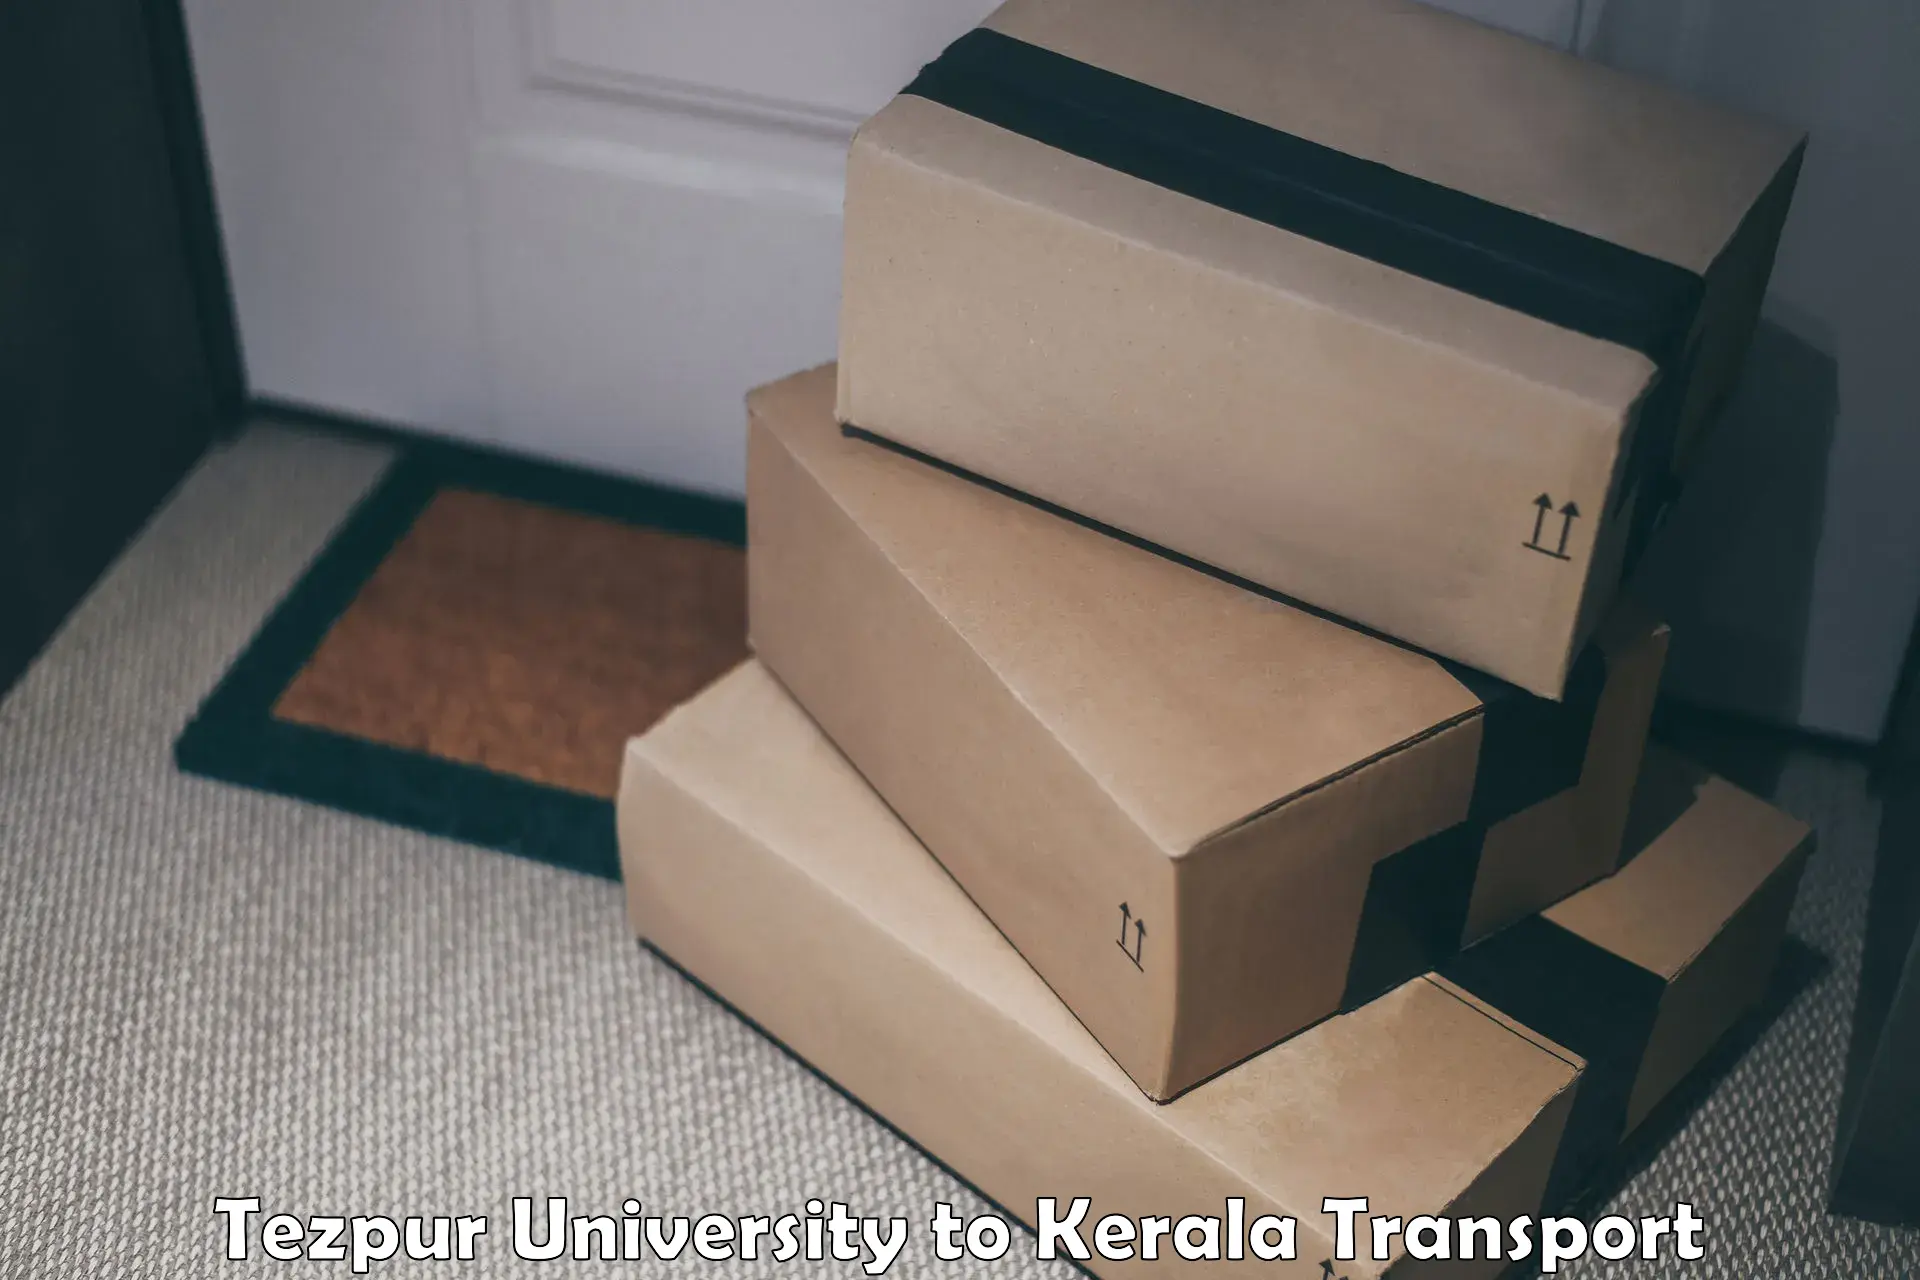 Container transport service Tezpur University to Kasaragod